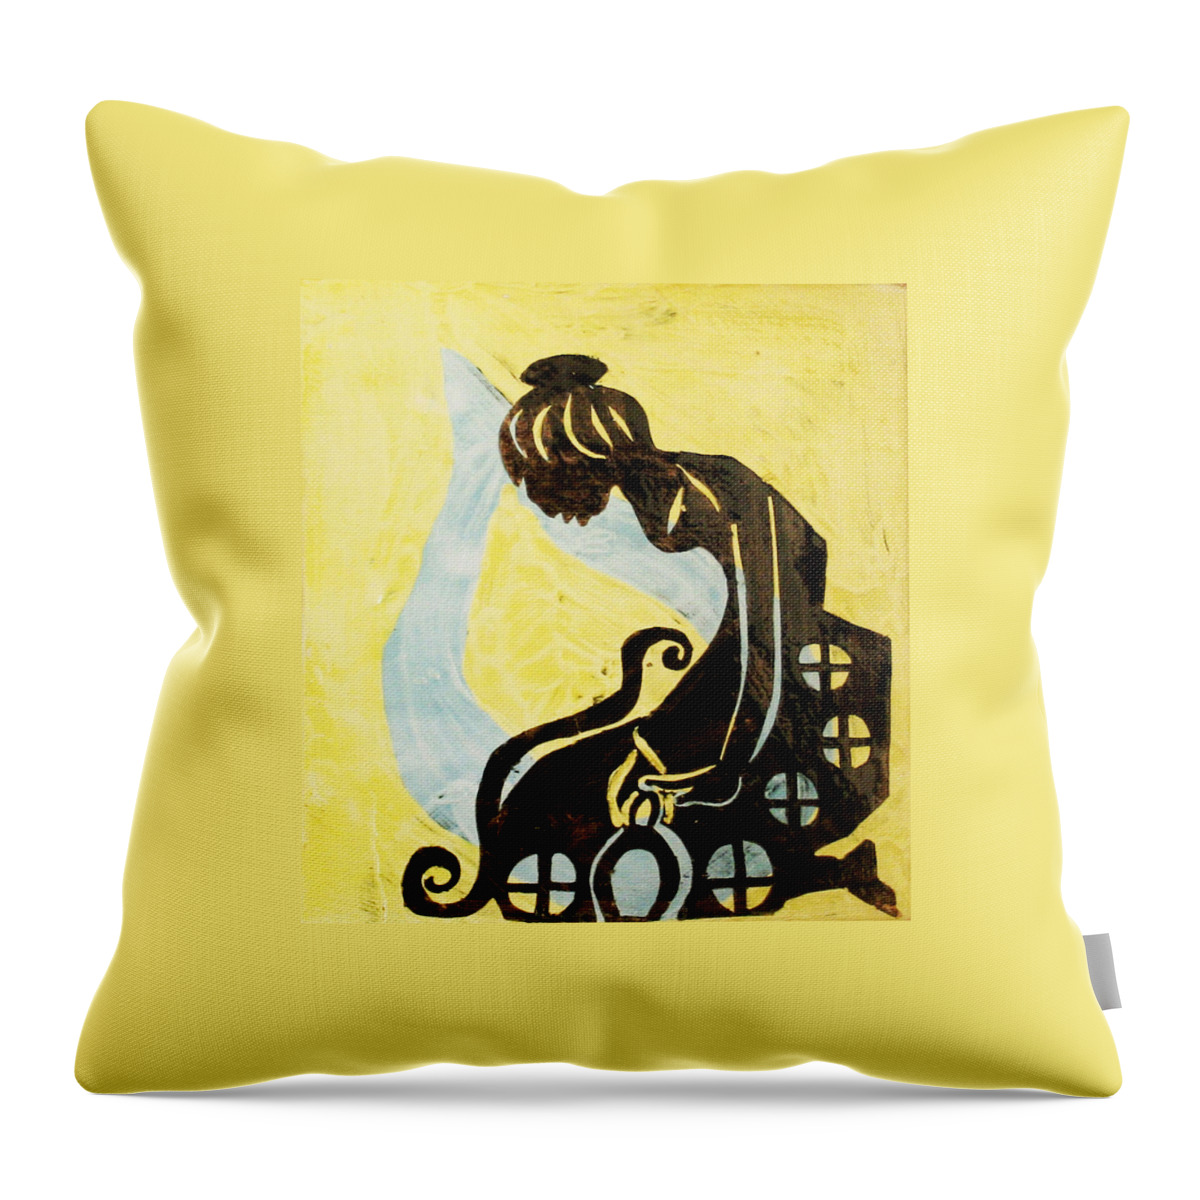 Jesus Throw Pillow featuring the painting The Wise Virgin #10 by Gloria Ssali